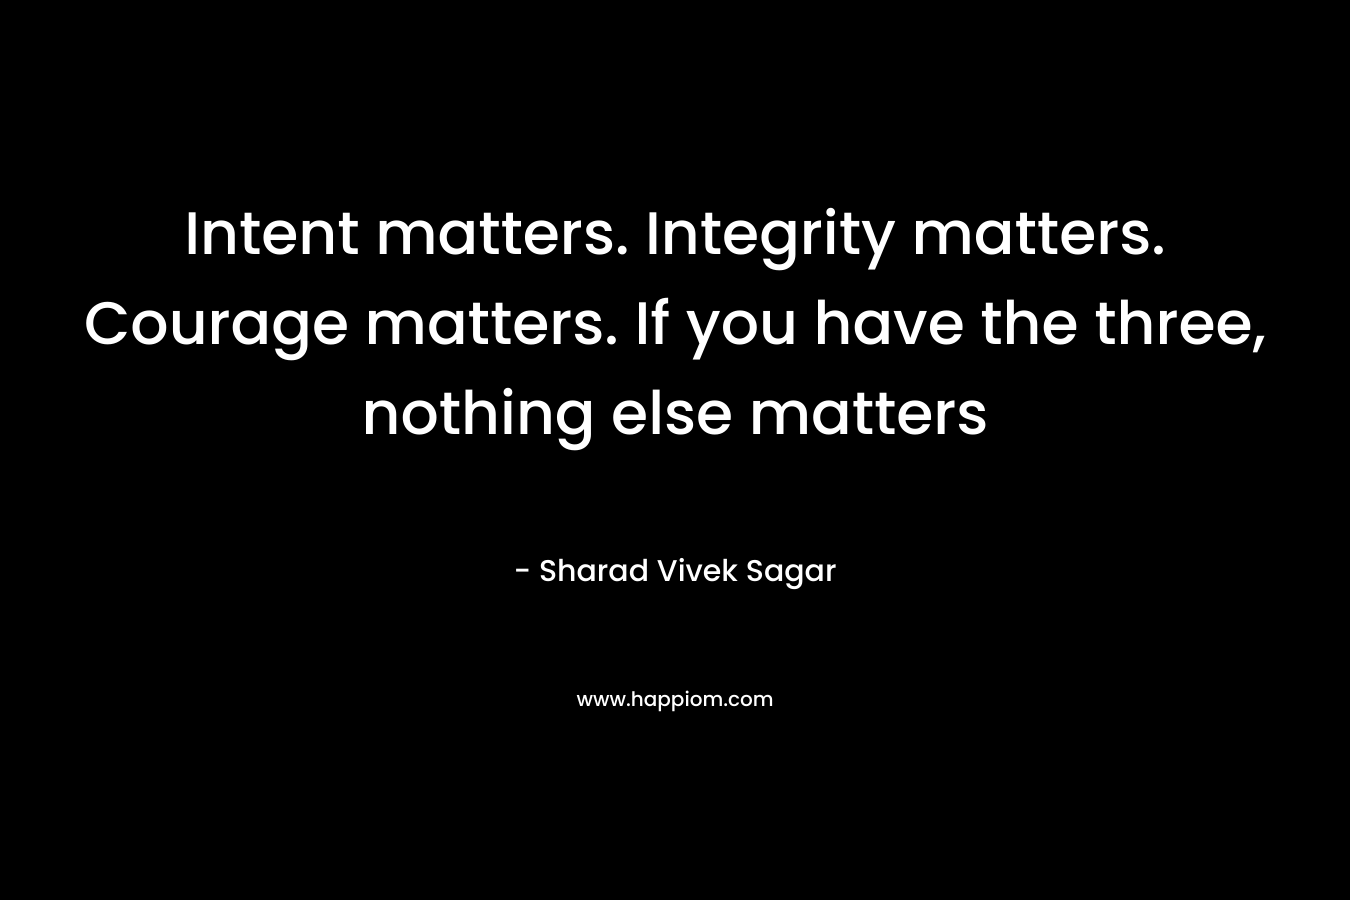 Intent matters. Integrity matters. Courage matters. If you have the three, nothing else matters